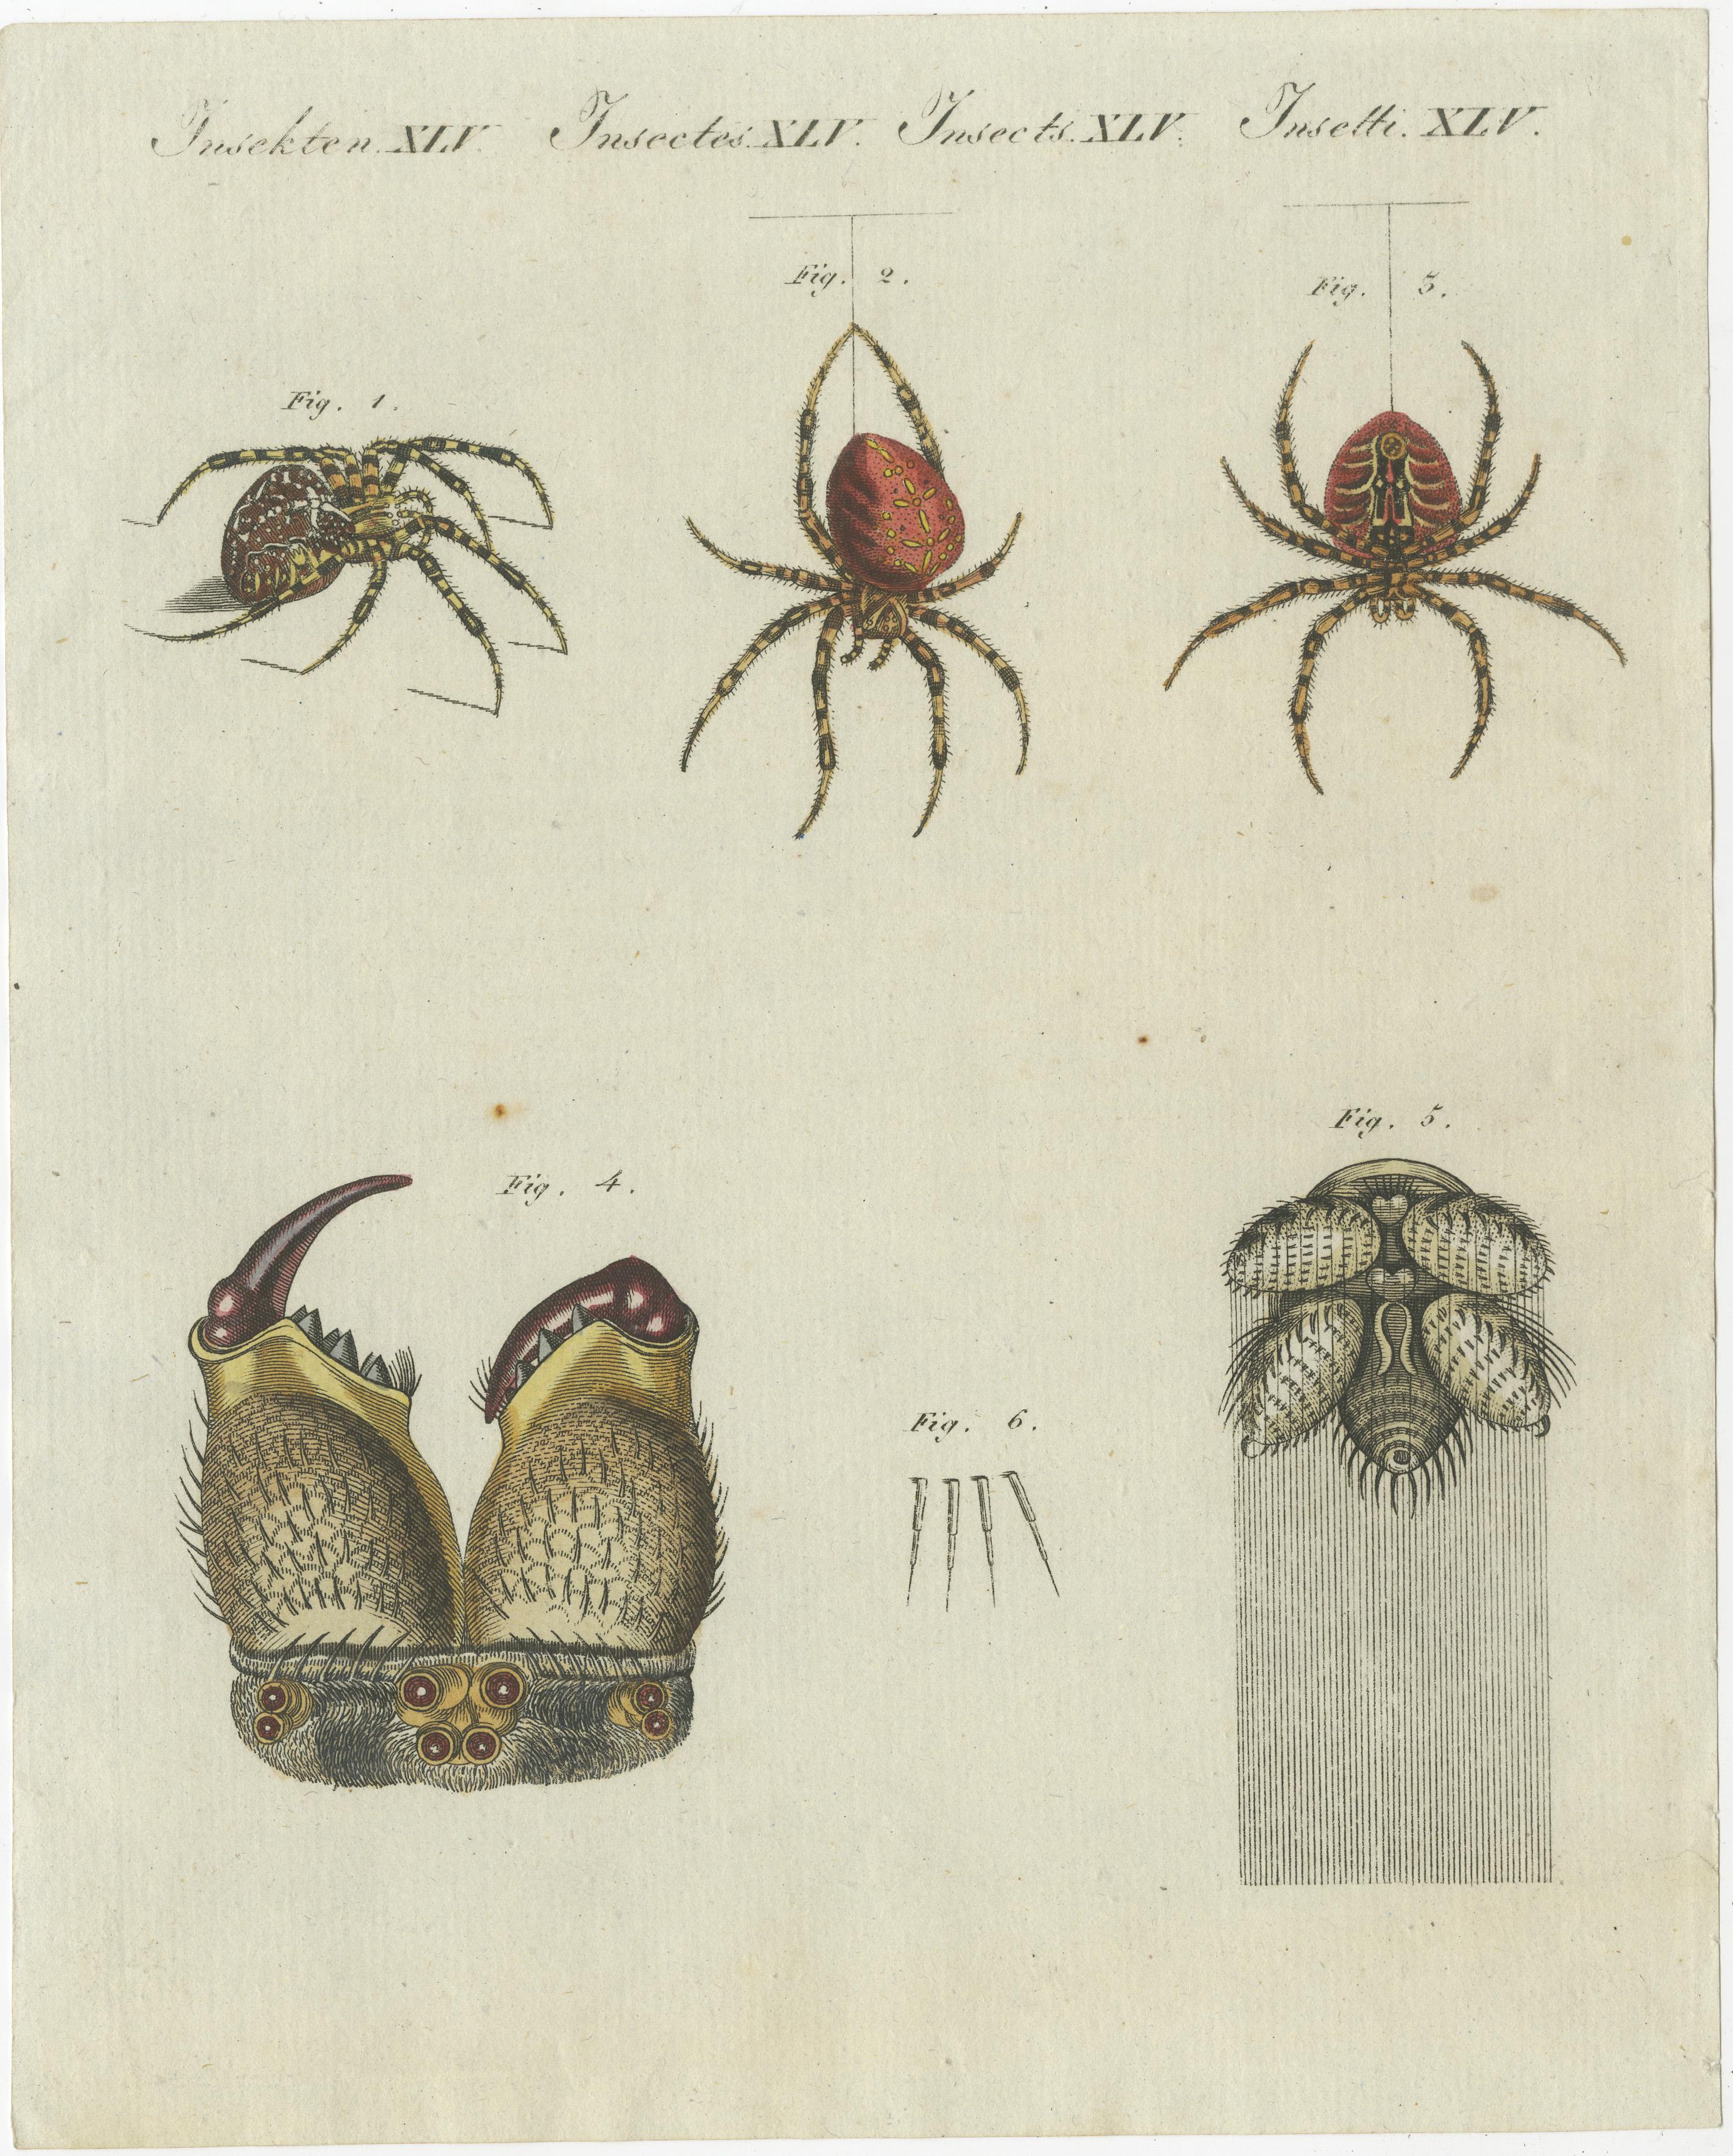 Set of two original antique prints of various insects including spiders, mites and others. These prints originate from 'Bilderbuch fur Kinder' by F.J. Bertuch. Friedrich Johann Bertuch (1747-1822) was a German publisher and man of arts most famous